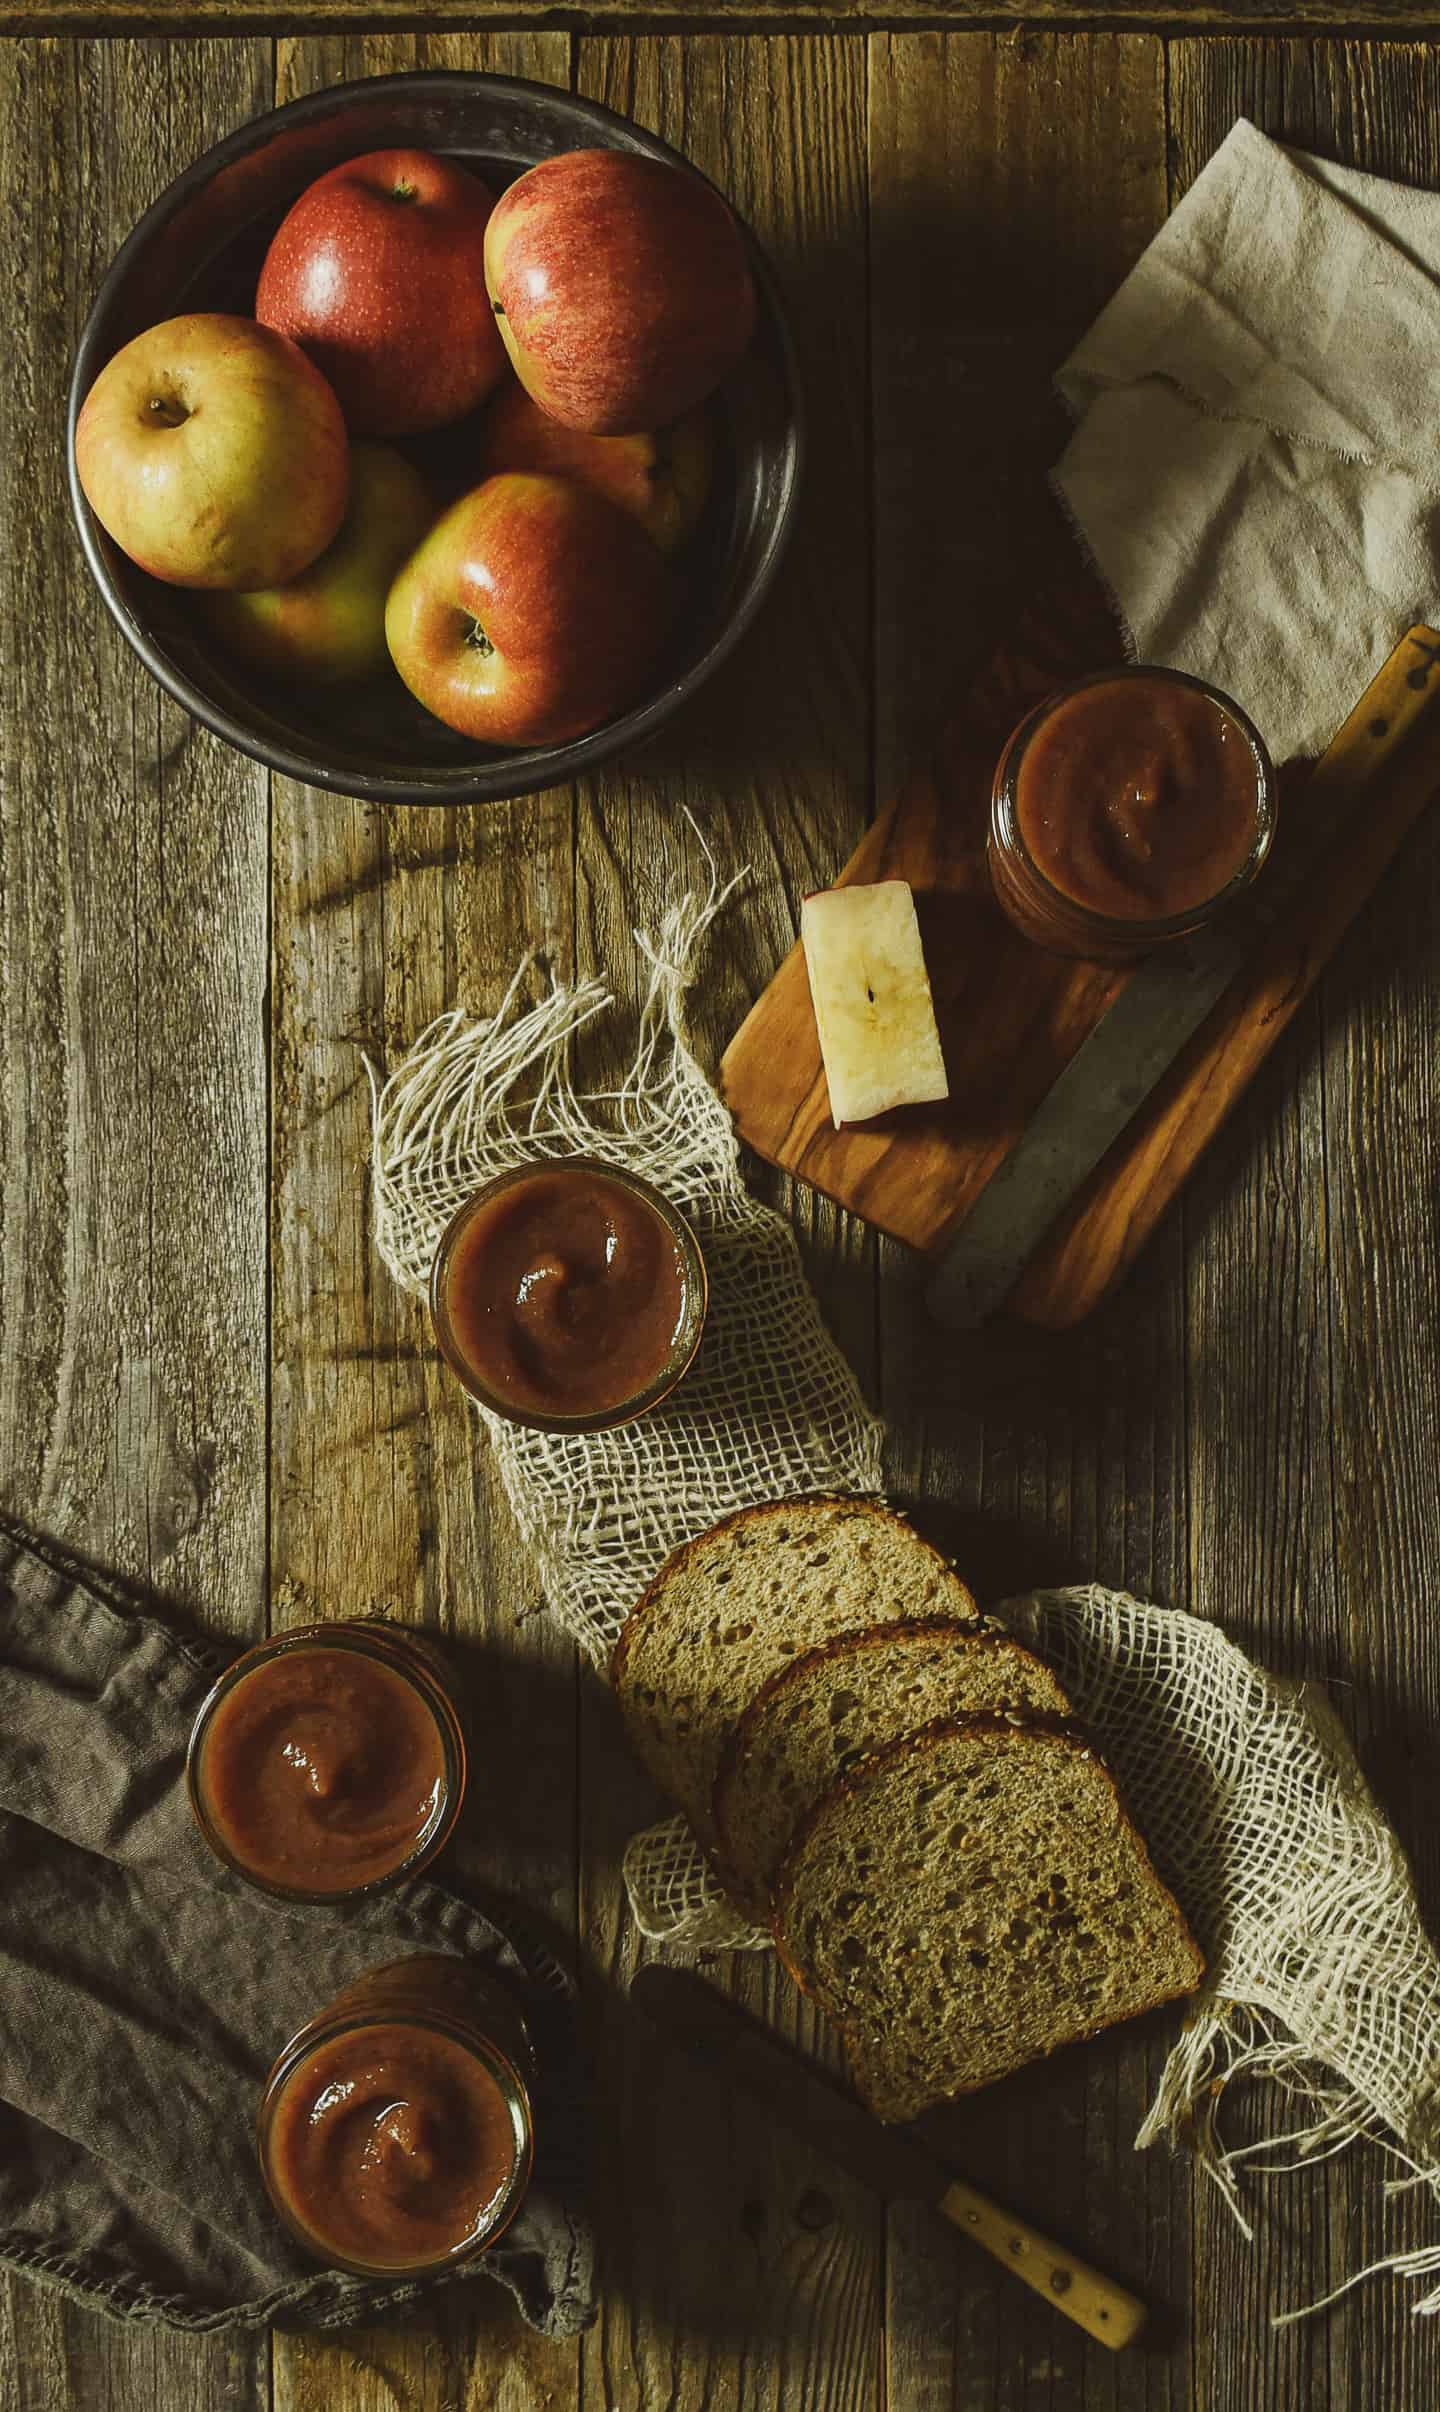 Instant Pot Apple Butter is so easy to make and ready in less than an hour using 5 simple ingredients. A deliciously warm spread, flavoring, or filling. You will never again want to buy apple butter at the store! 